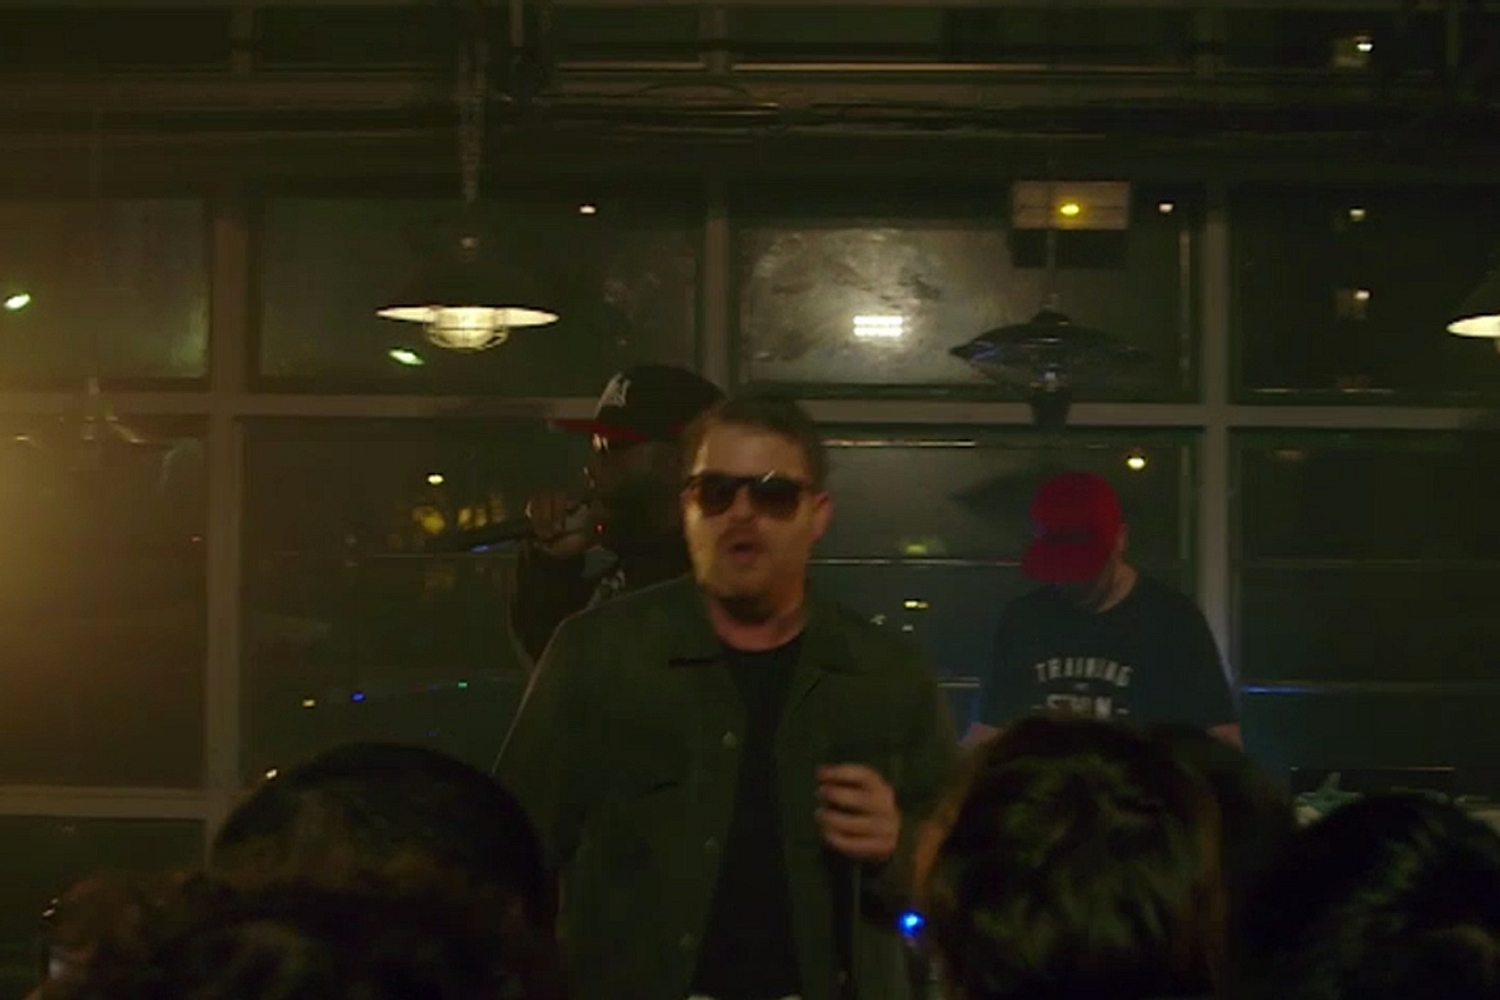 Watch Run The Jewels perform a set in a former railway station